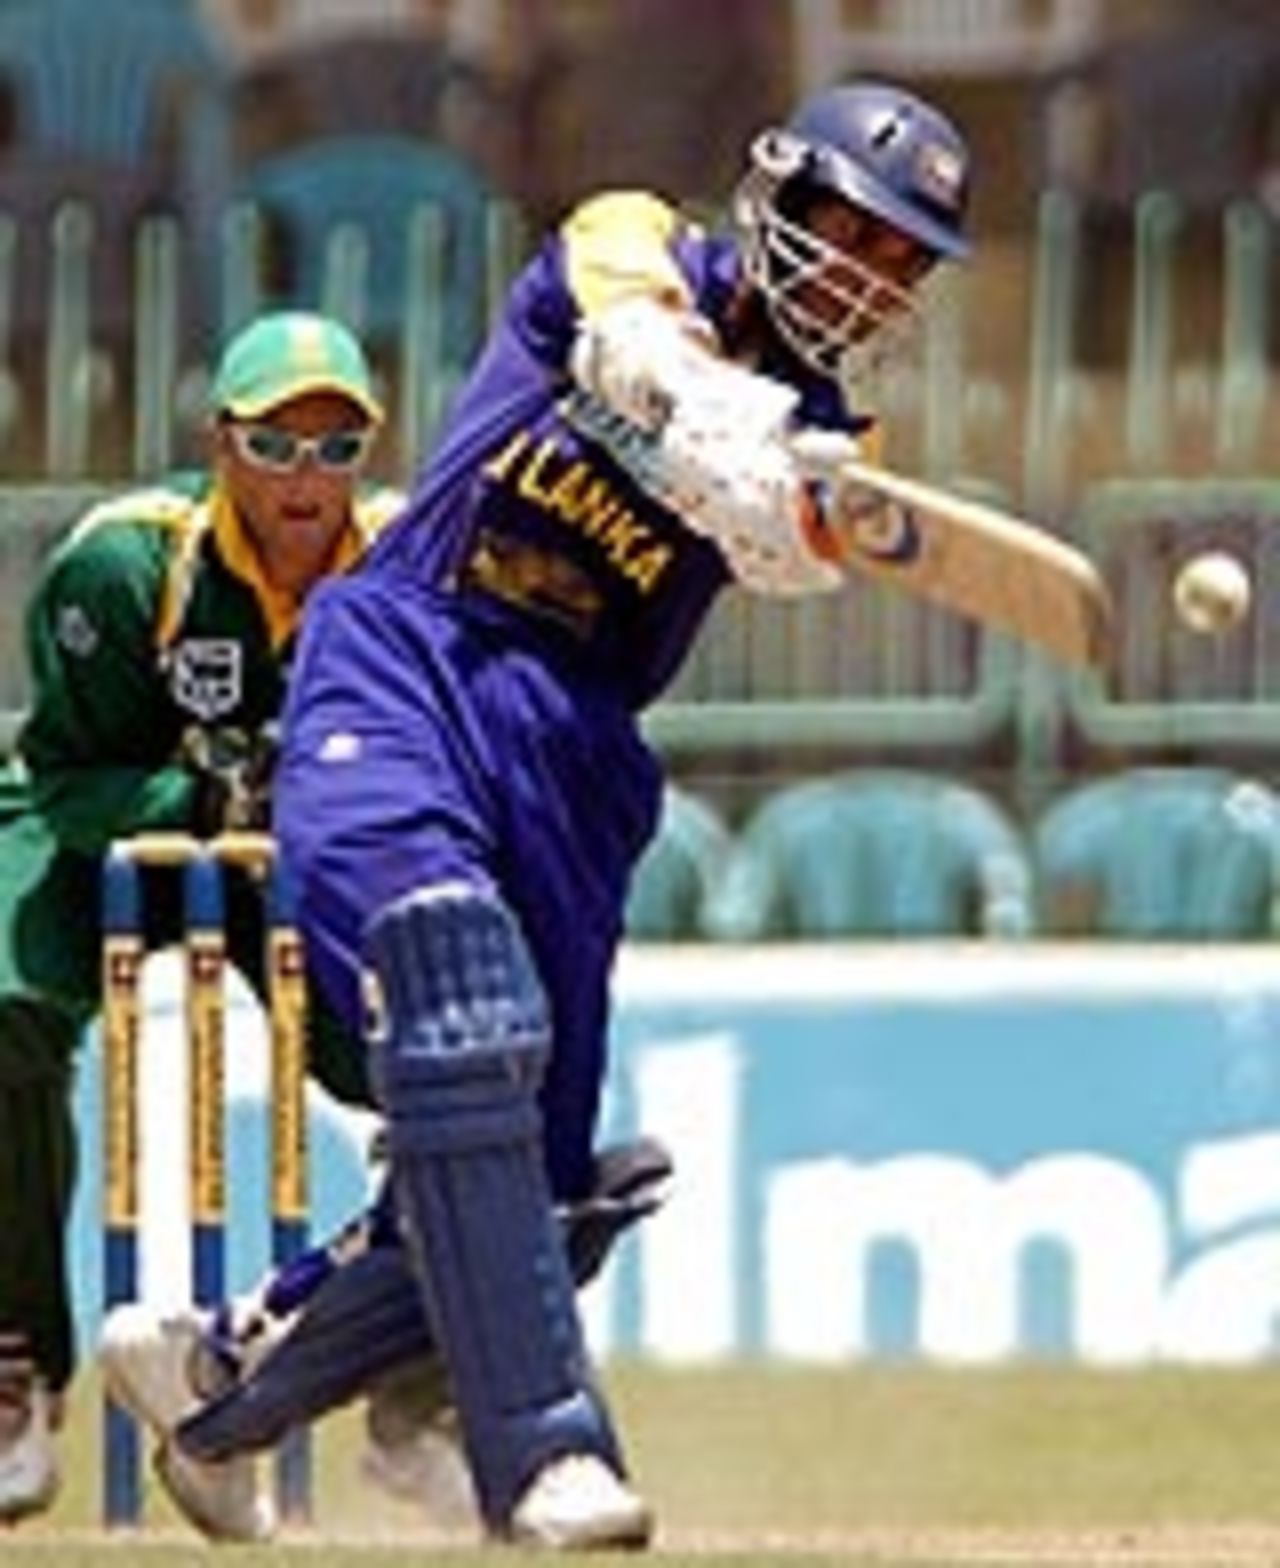 Kumar Sangakkara played the matchwinning innings, as South Africa were condemned to yet another defeat, in the fourth one-day international at Dambulla